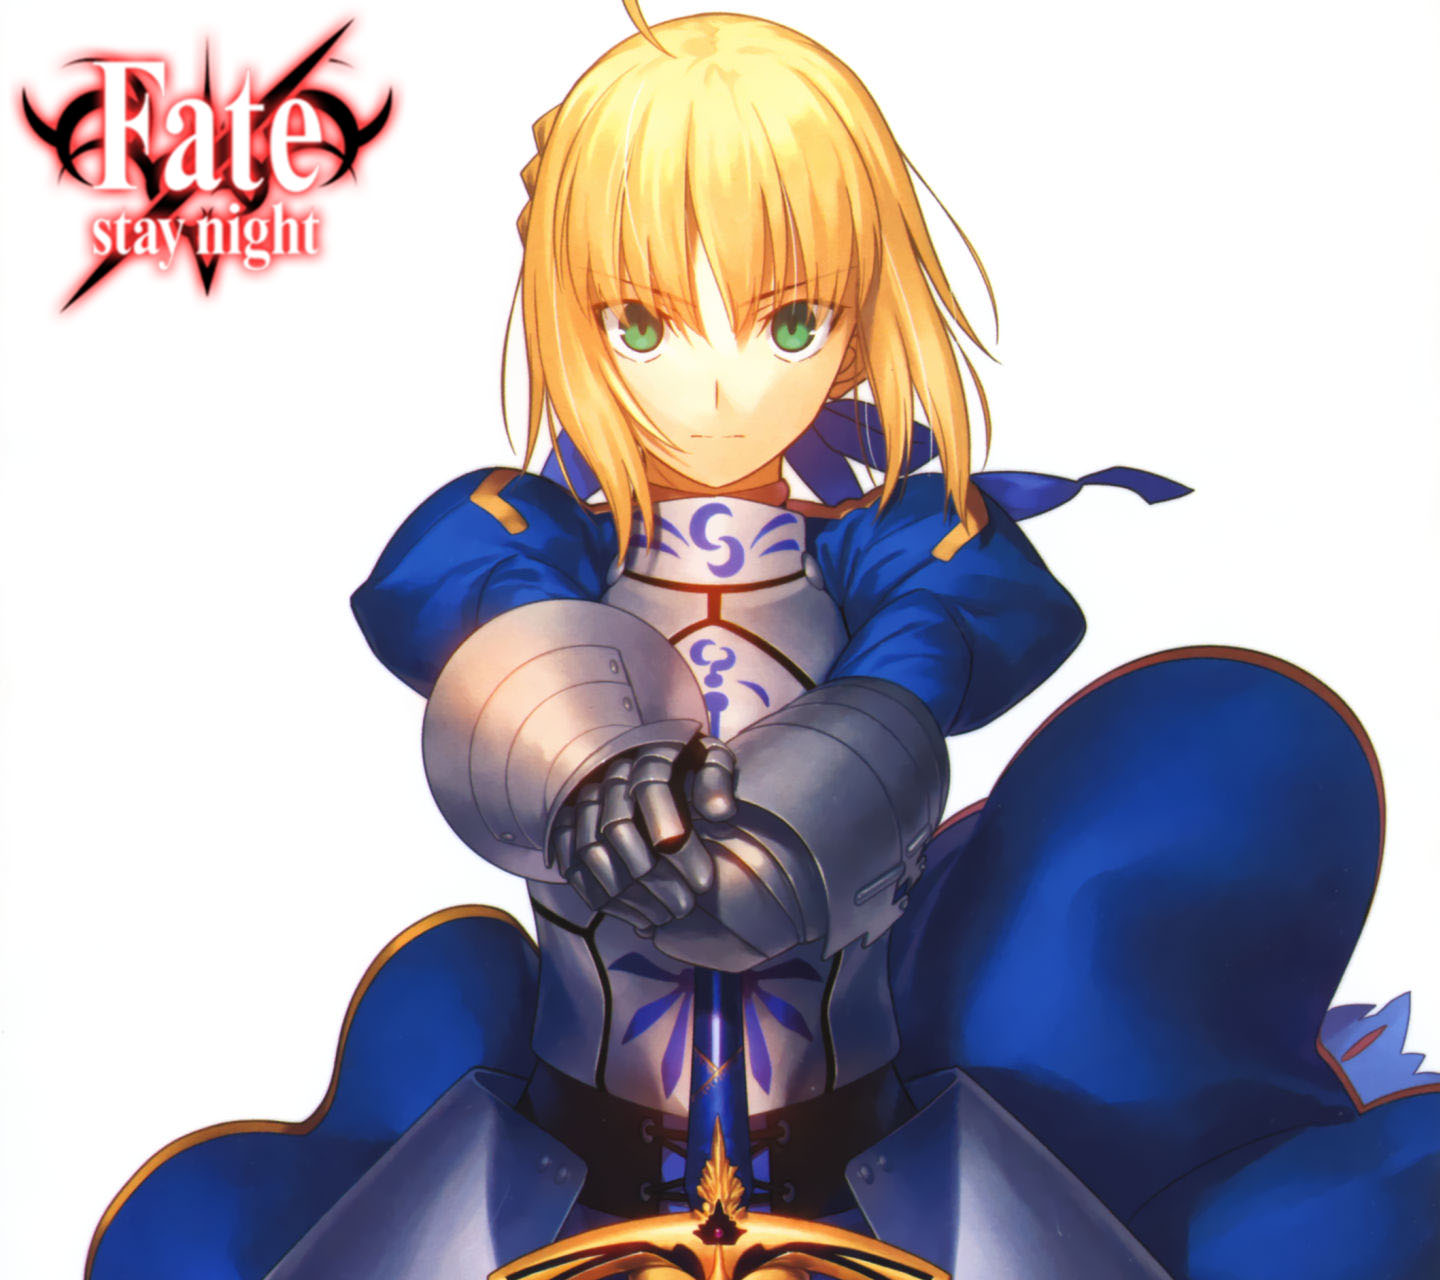 Fate Stay Night Android壁紙 アニメ壁紙ネット Pc Android Iphone壁紙 画像